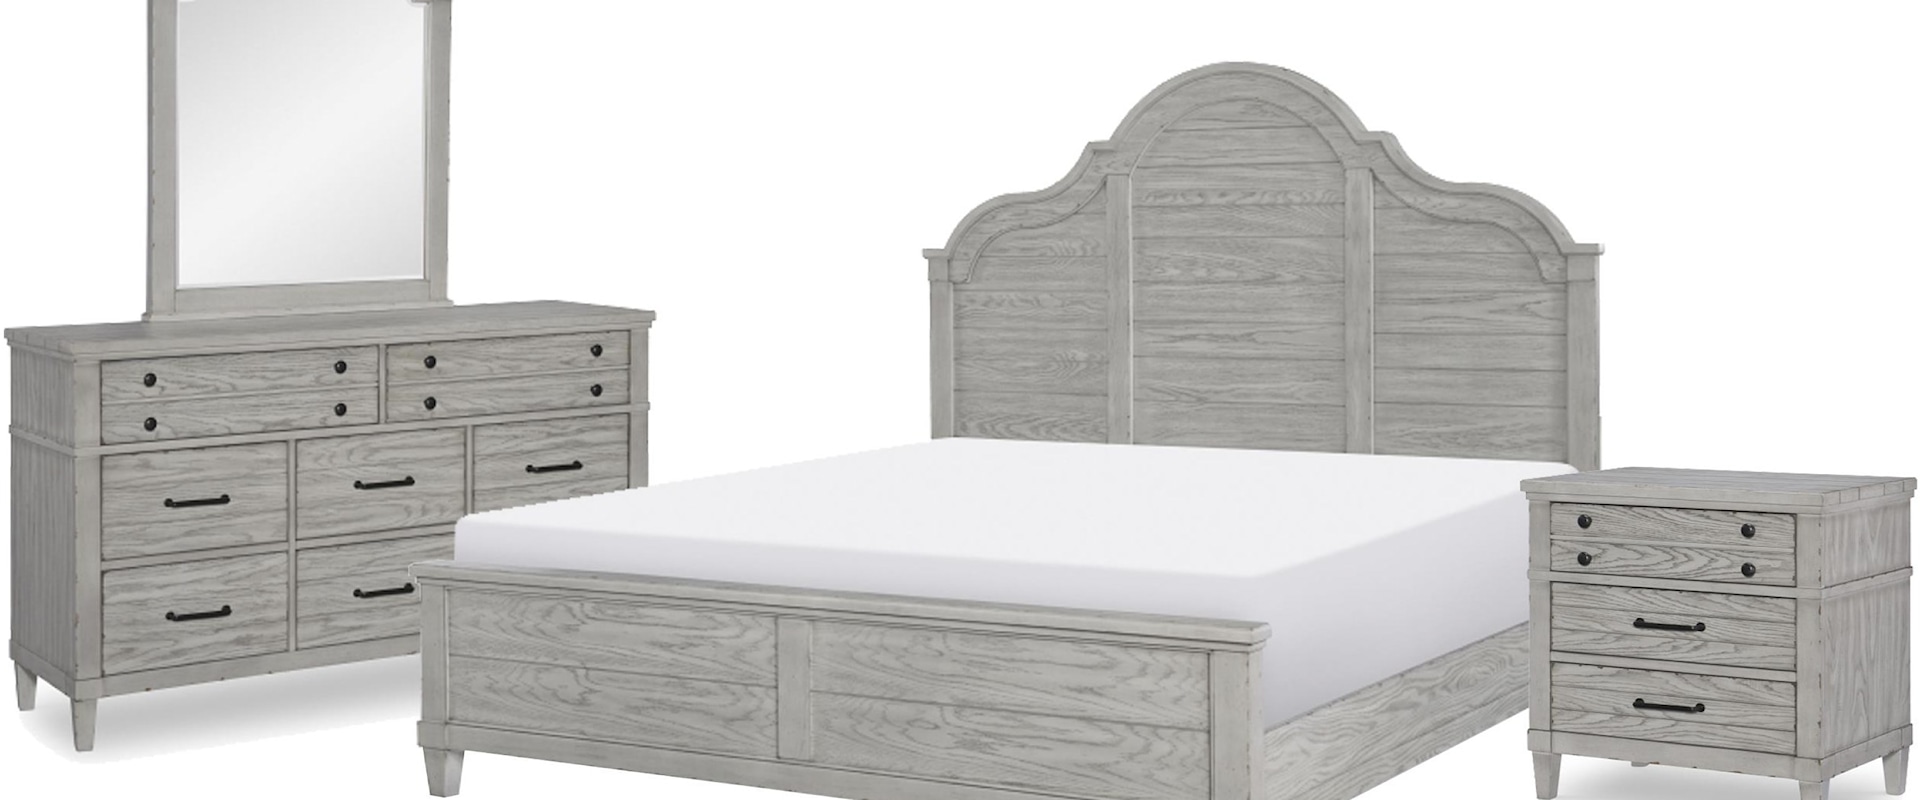 Queen Arch Panel Bed, 8 Drawer Dresser, Arched Mirror, and Nightstand